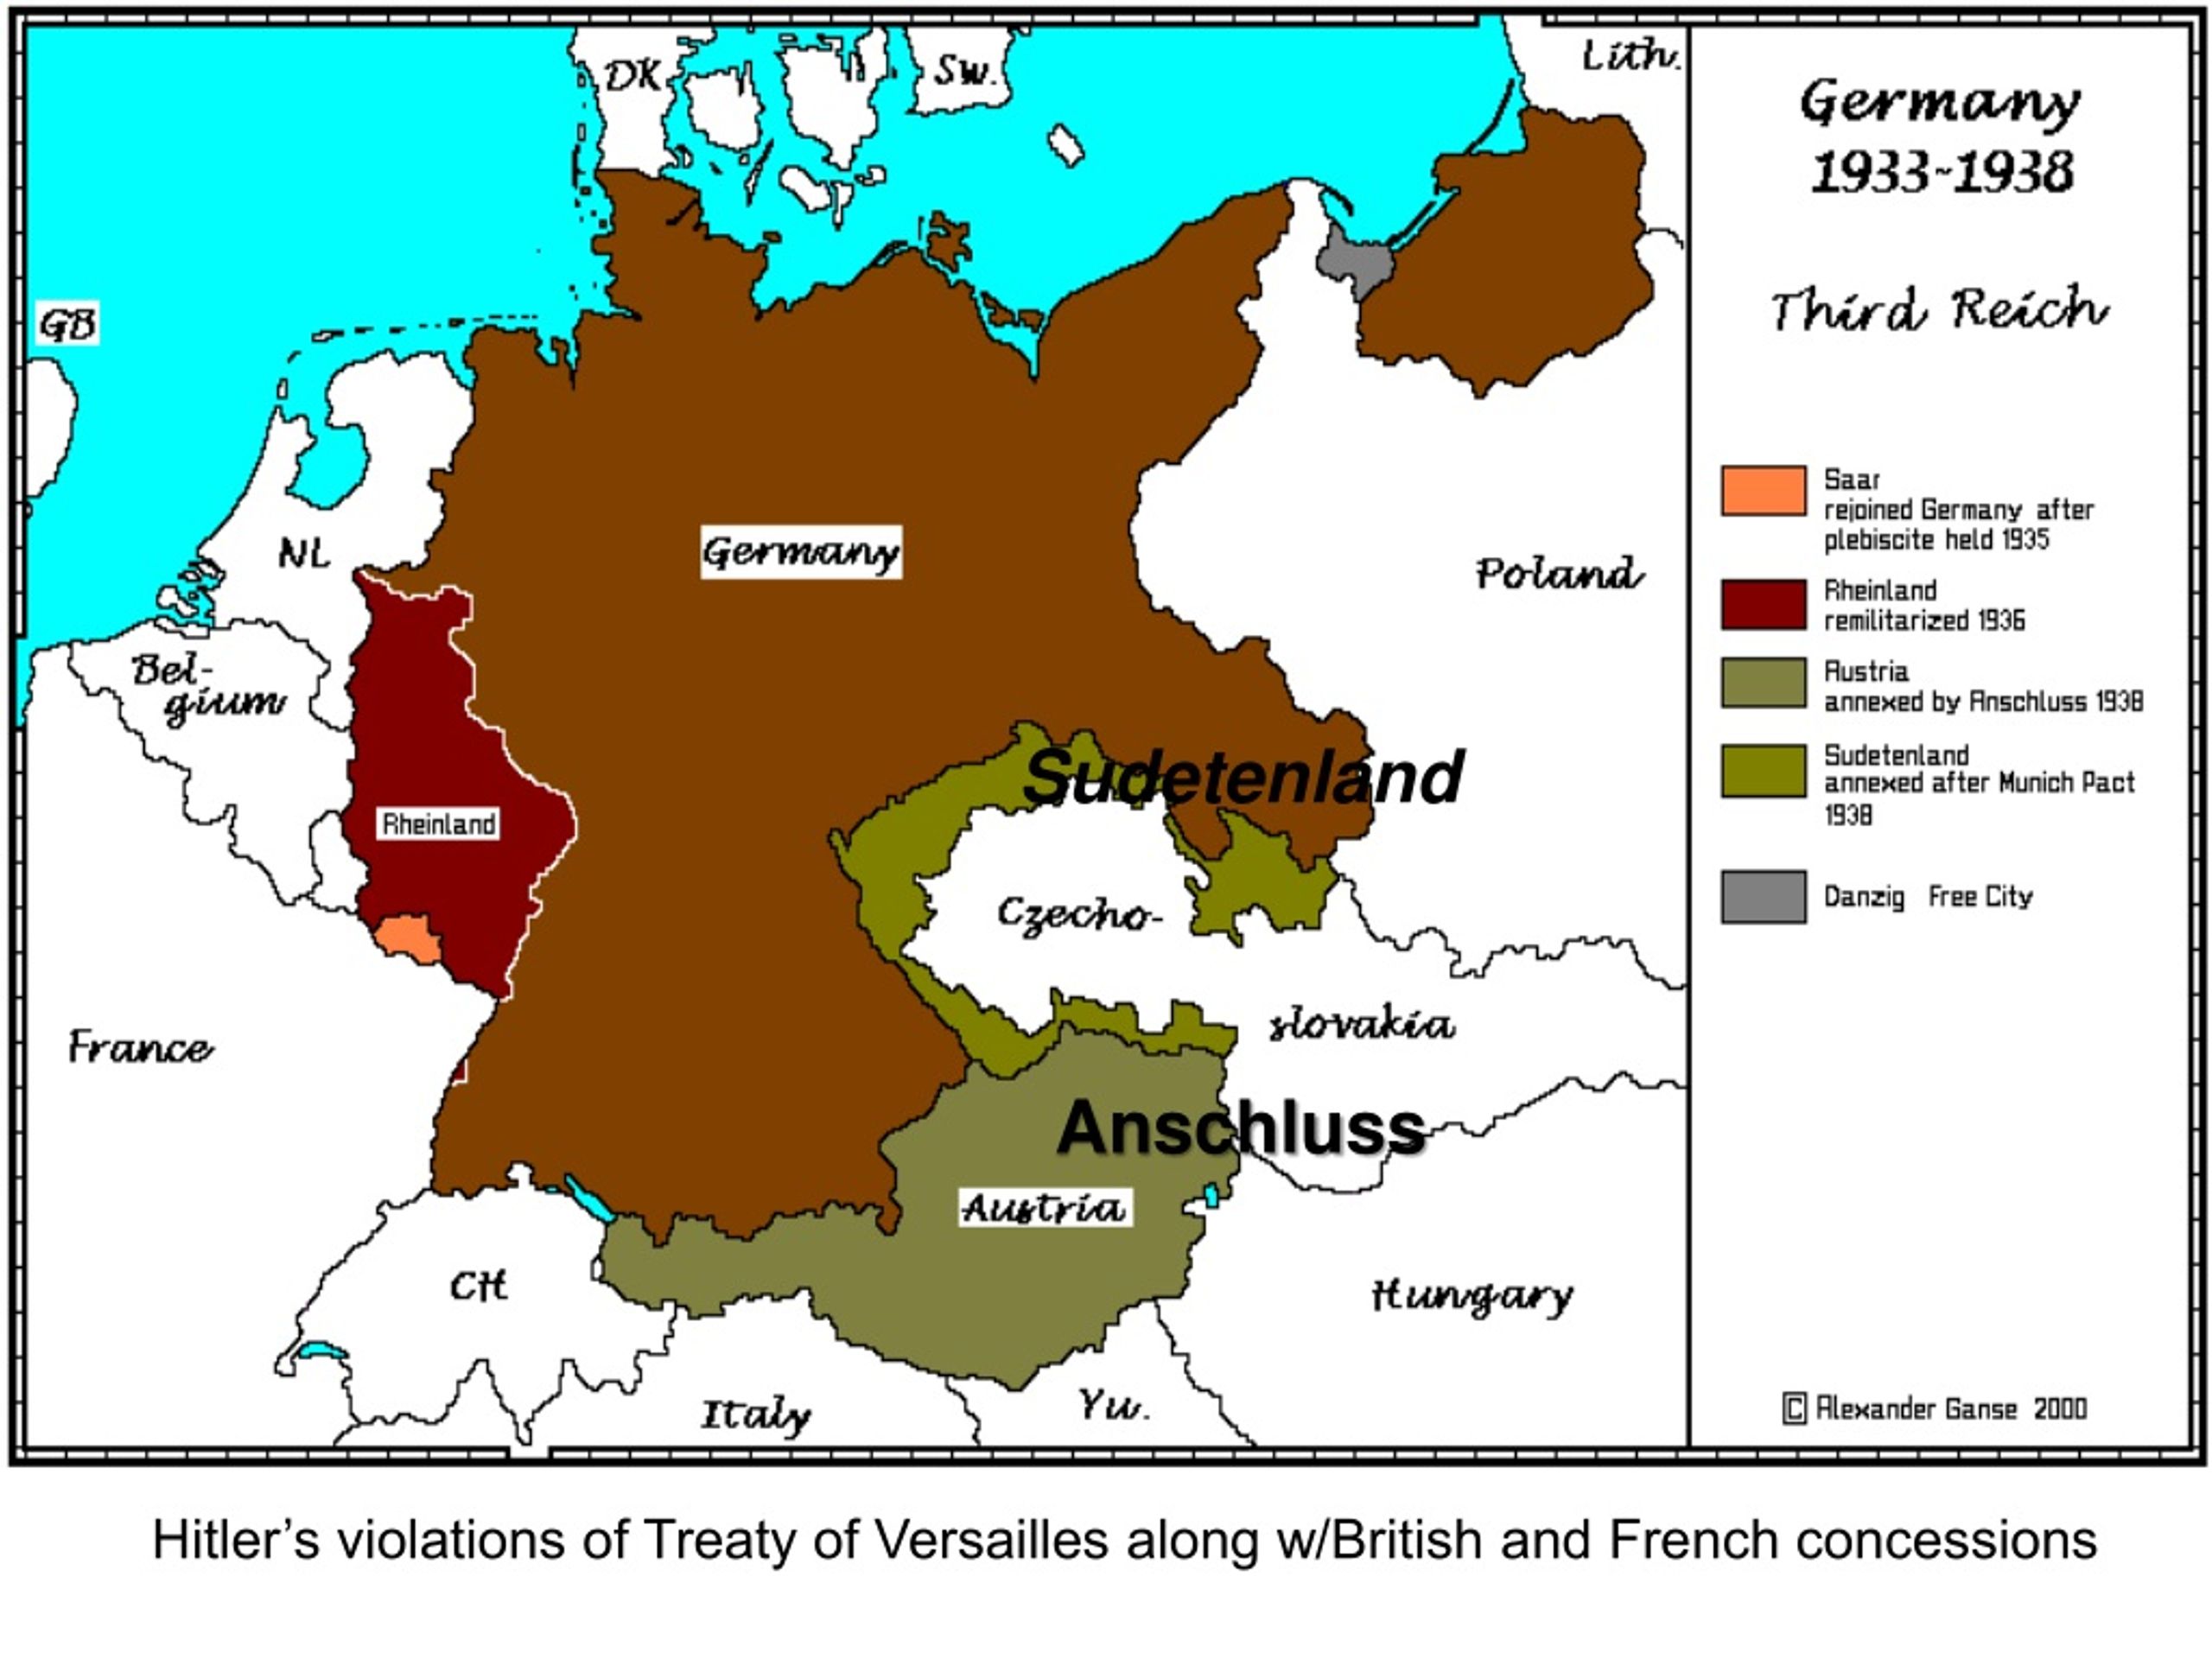 PPT - Hitler’s violations of Treaty of Versailles along w/British and ...